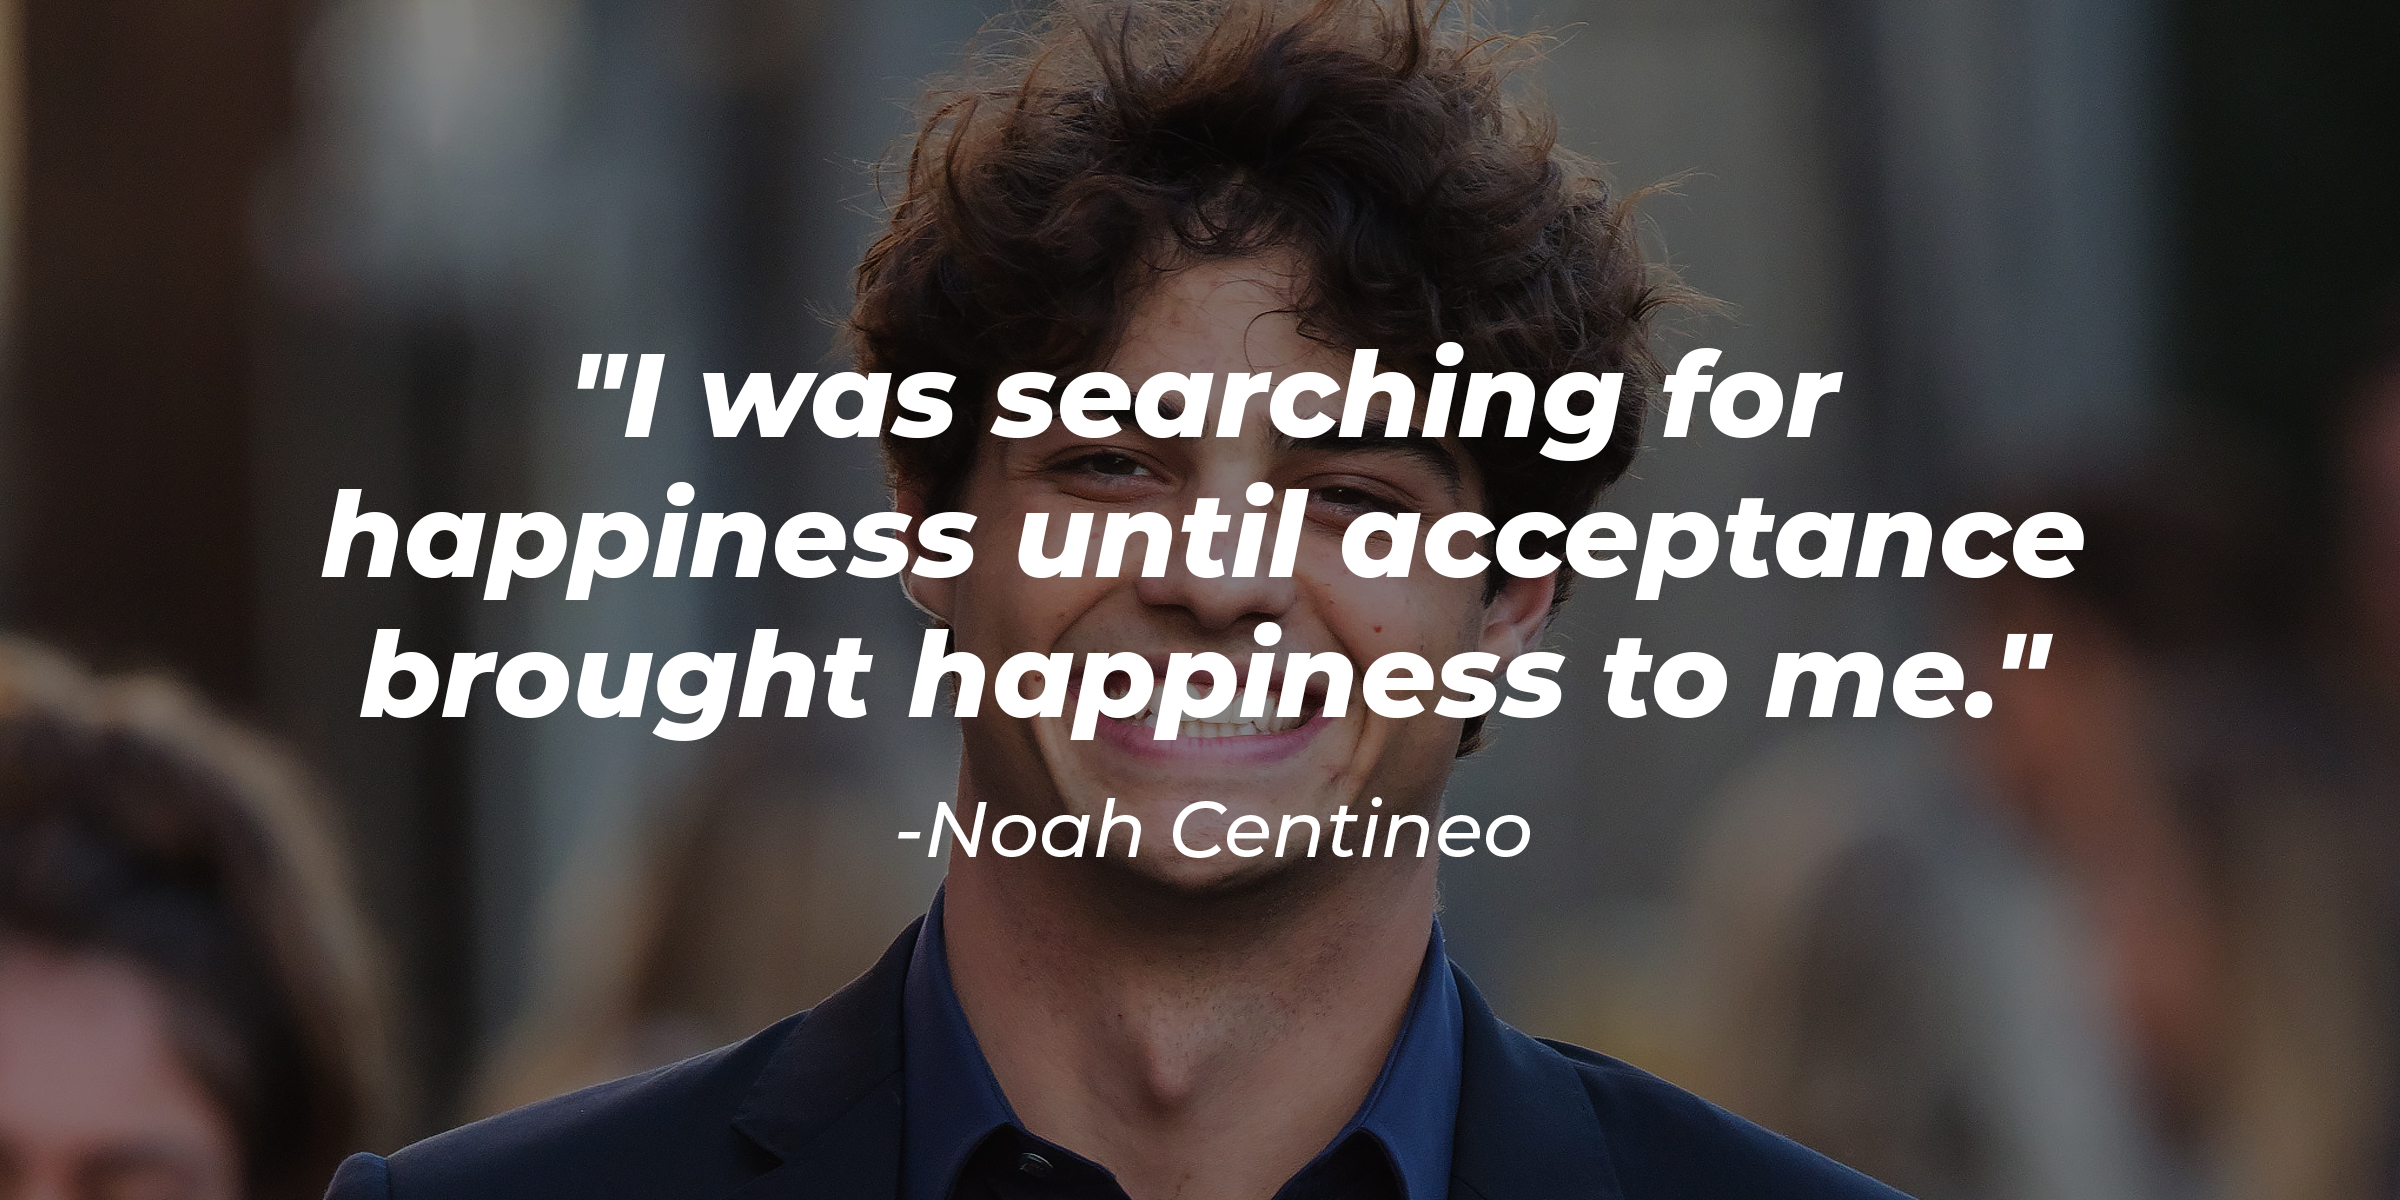 Source: Getty Images | A picture of Noah Centineo with his quote: "I was searching for happiness until acceptance brought happiness to me."